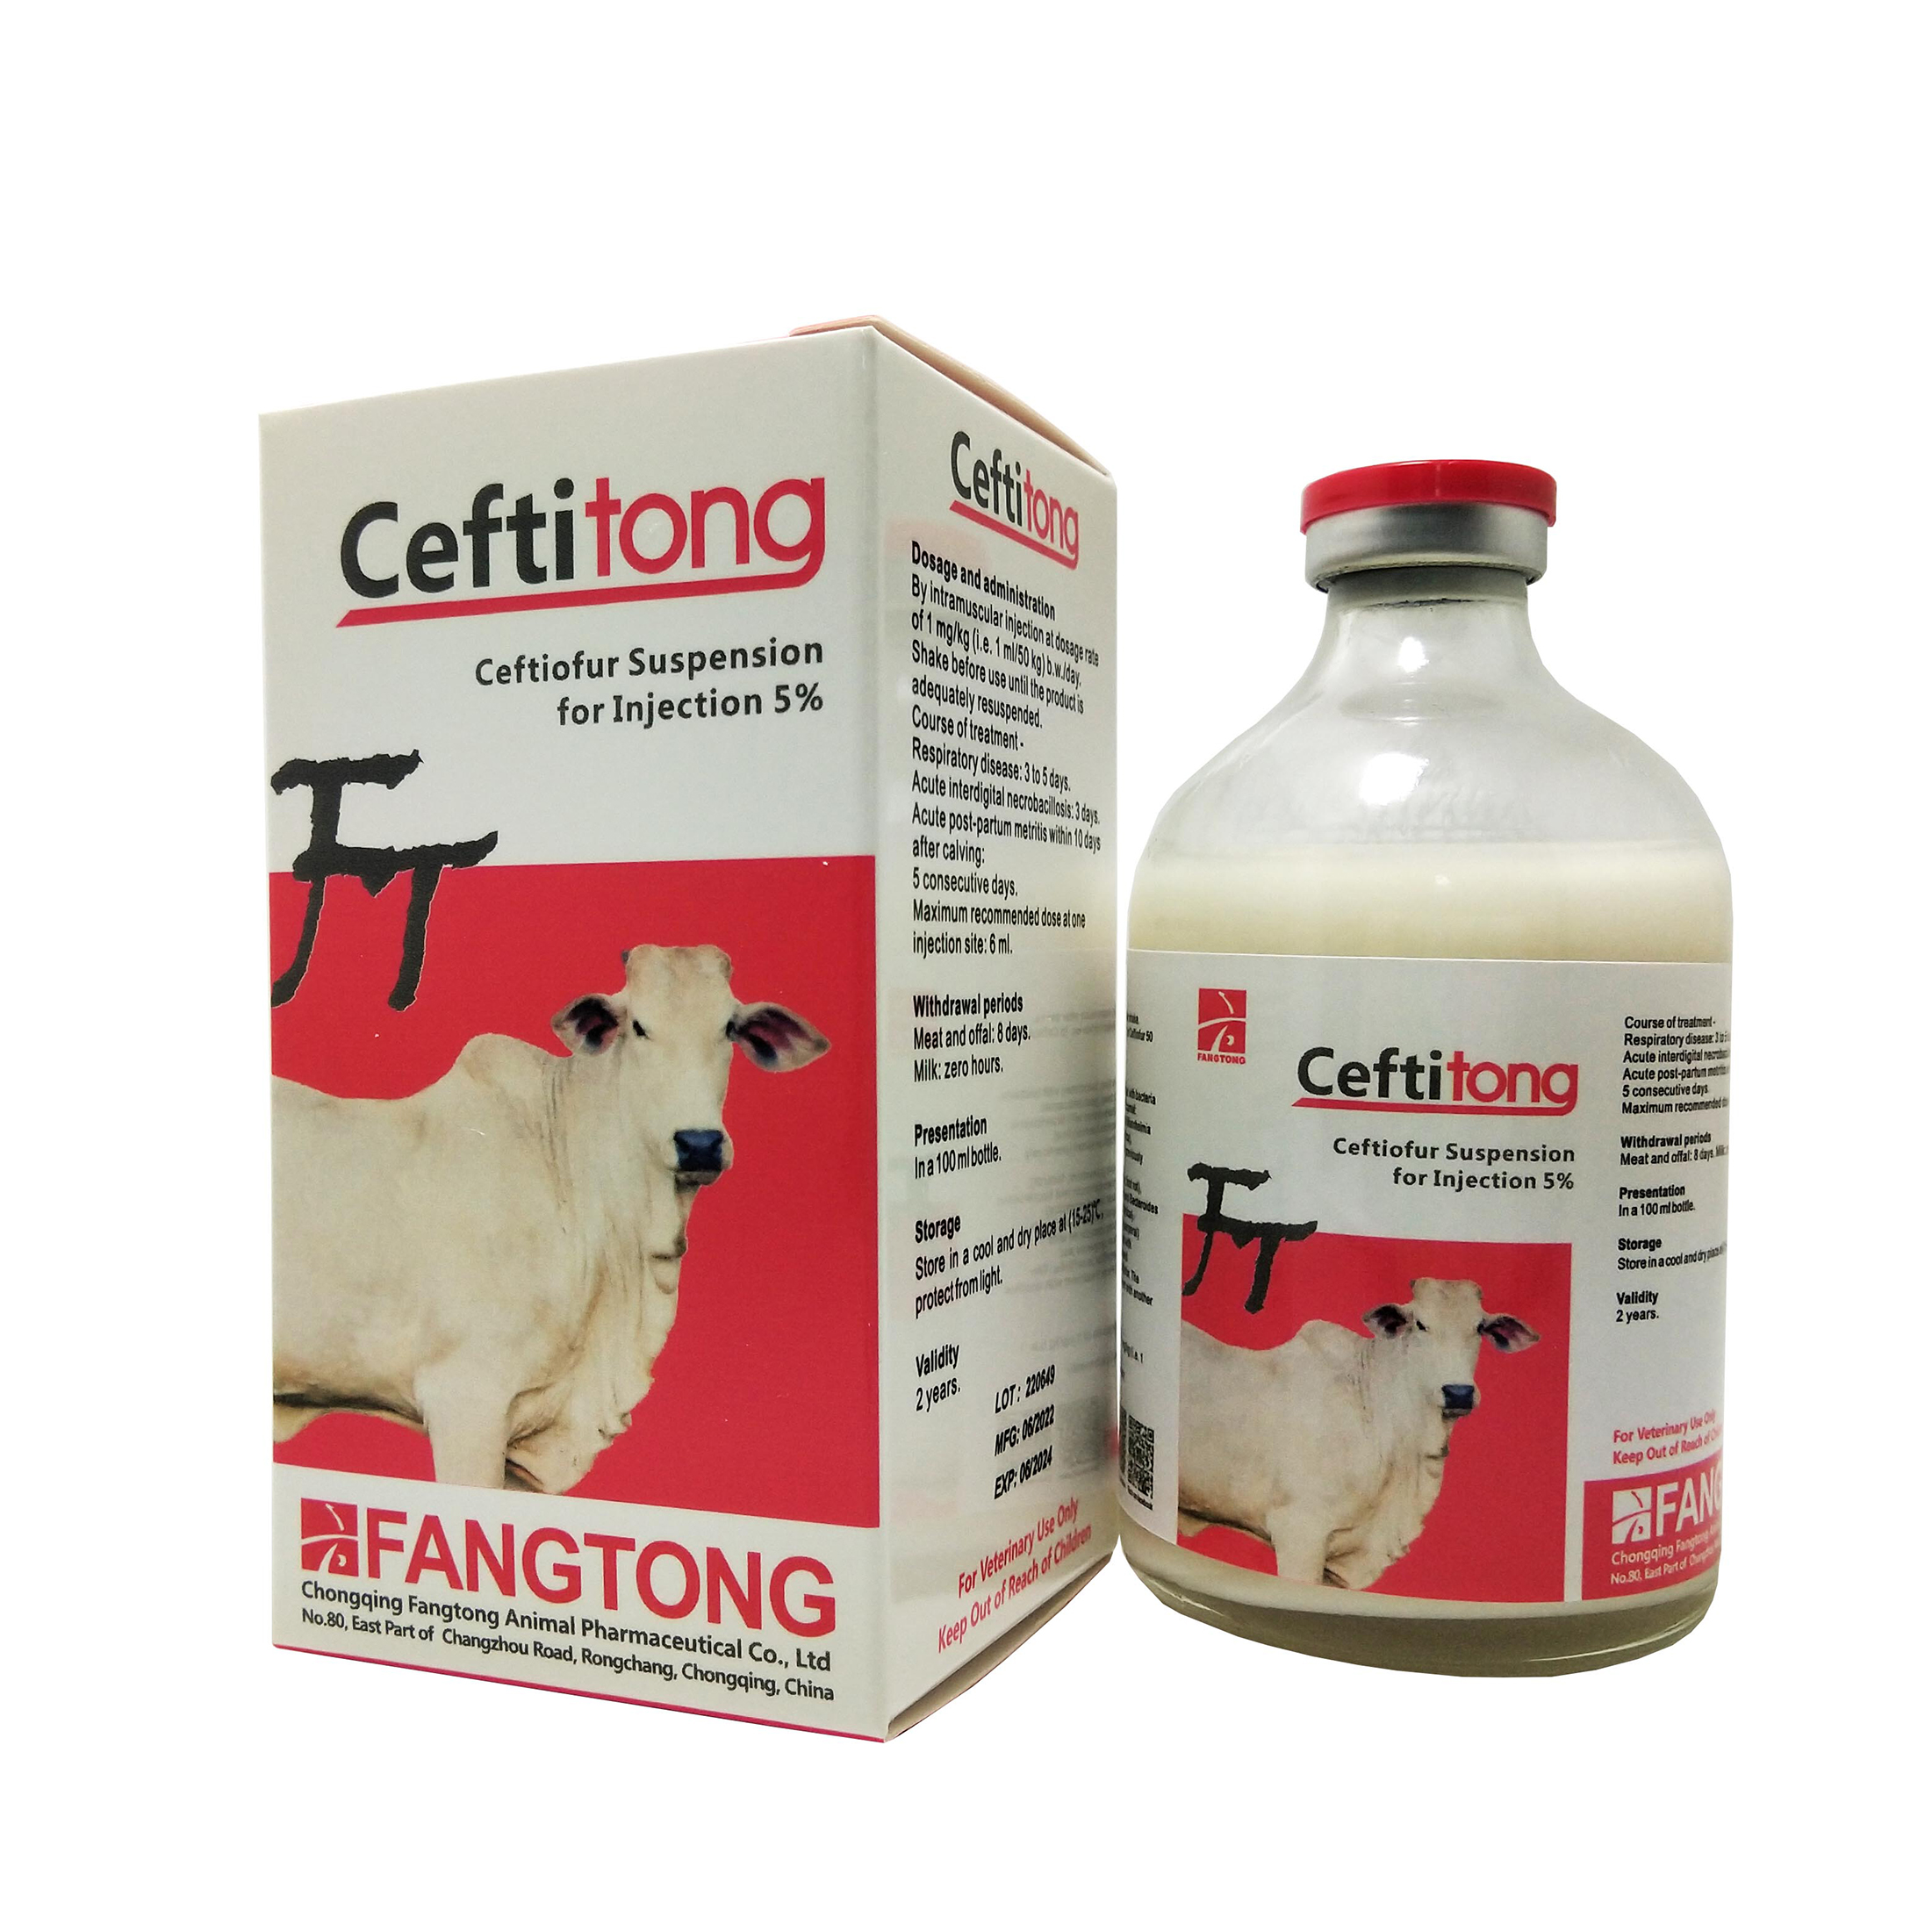 Ceftiofur Suspension for Injection 5% Featured Image